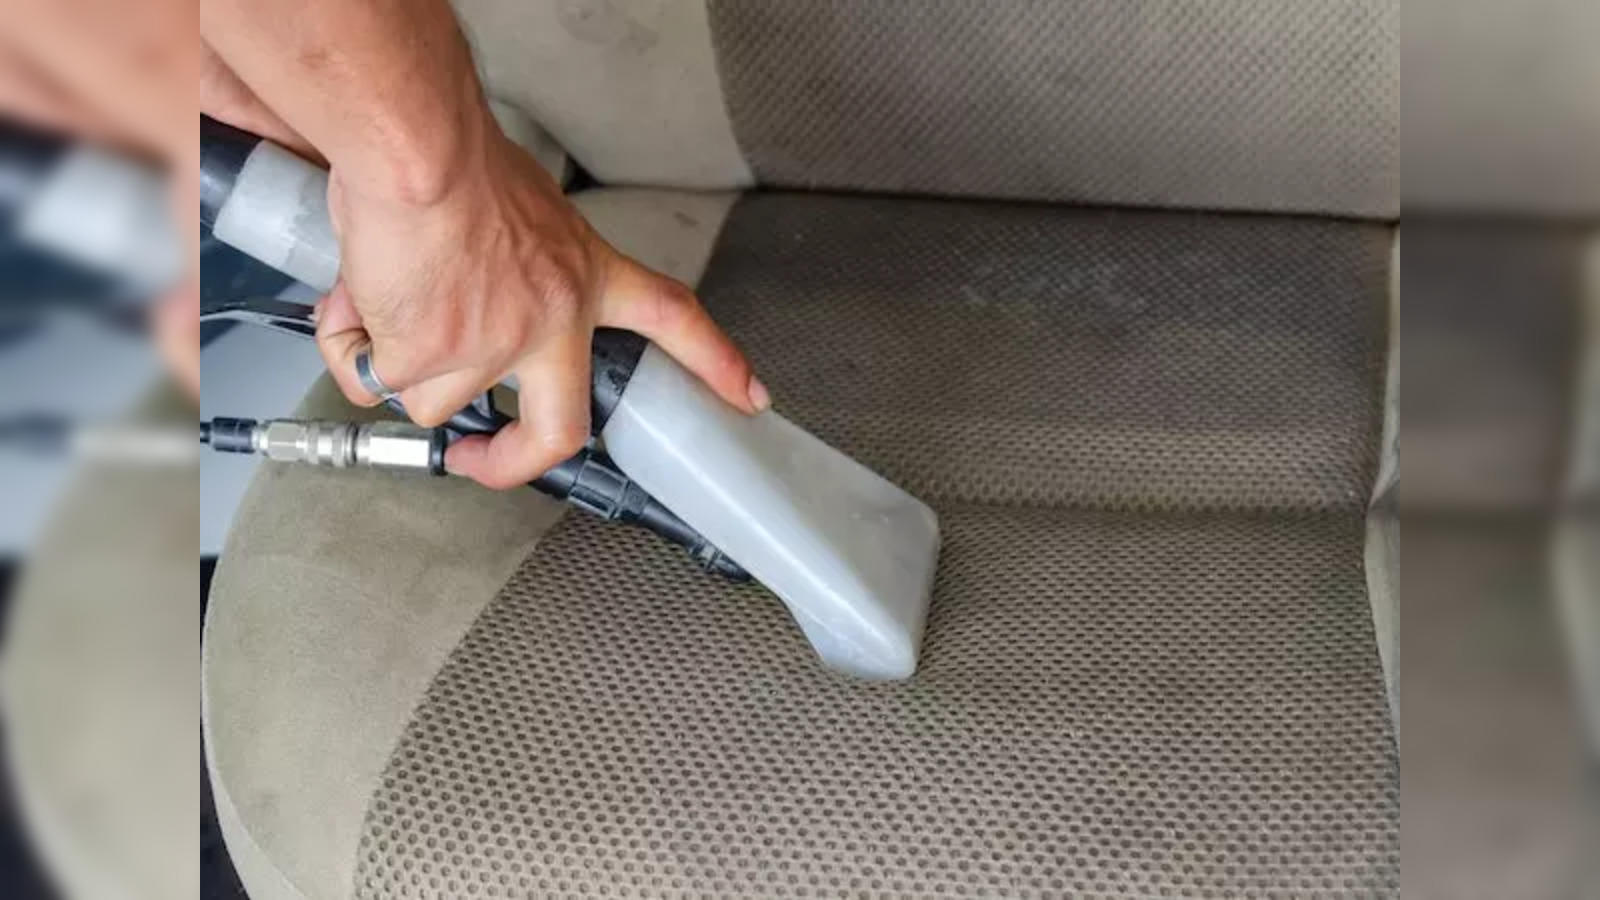 Prepare for spring cleaning with the ThisWorx Car Vacuum for $22, a new low